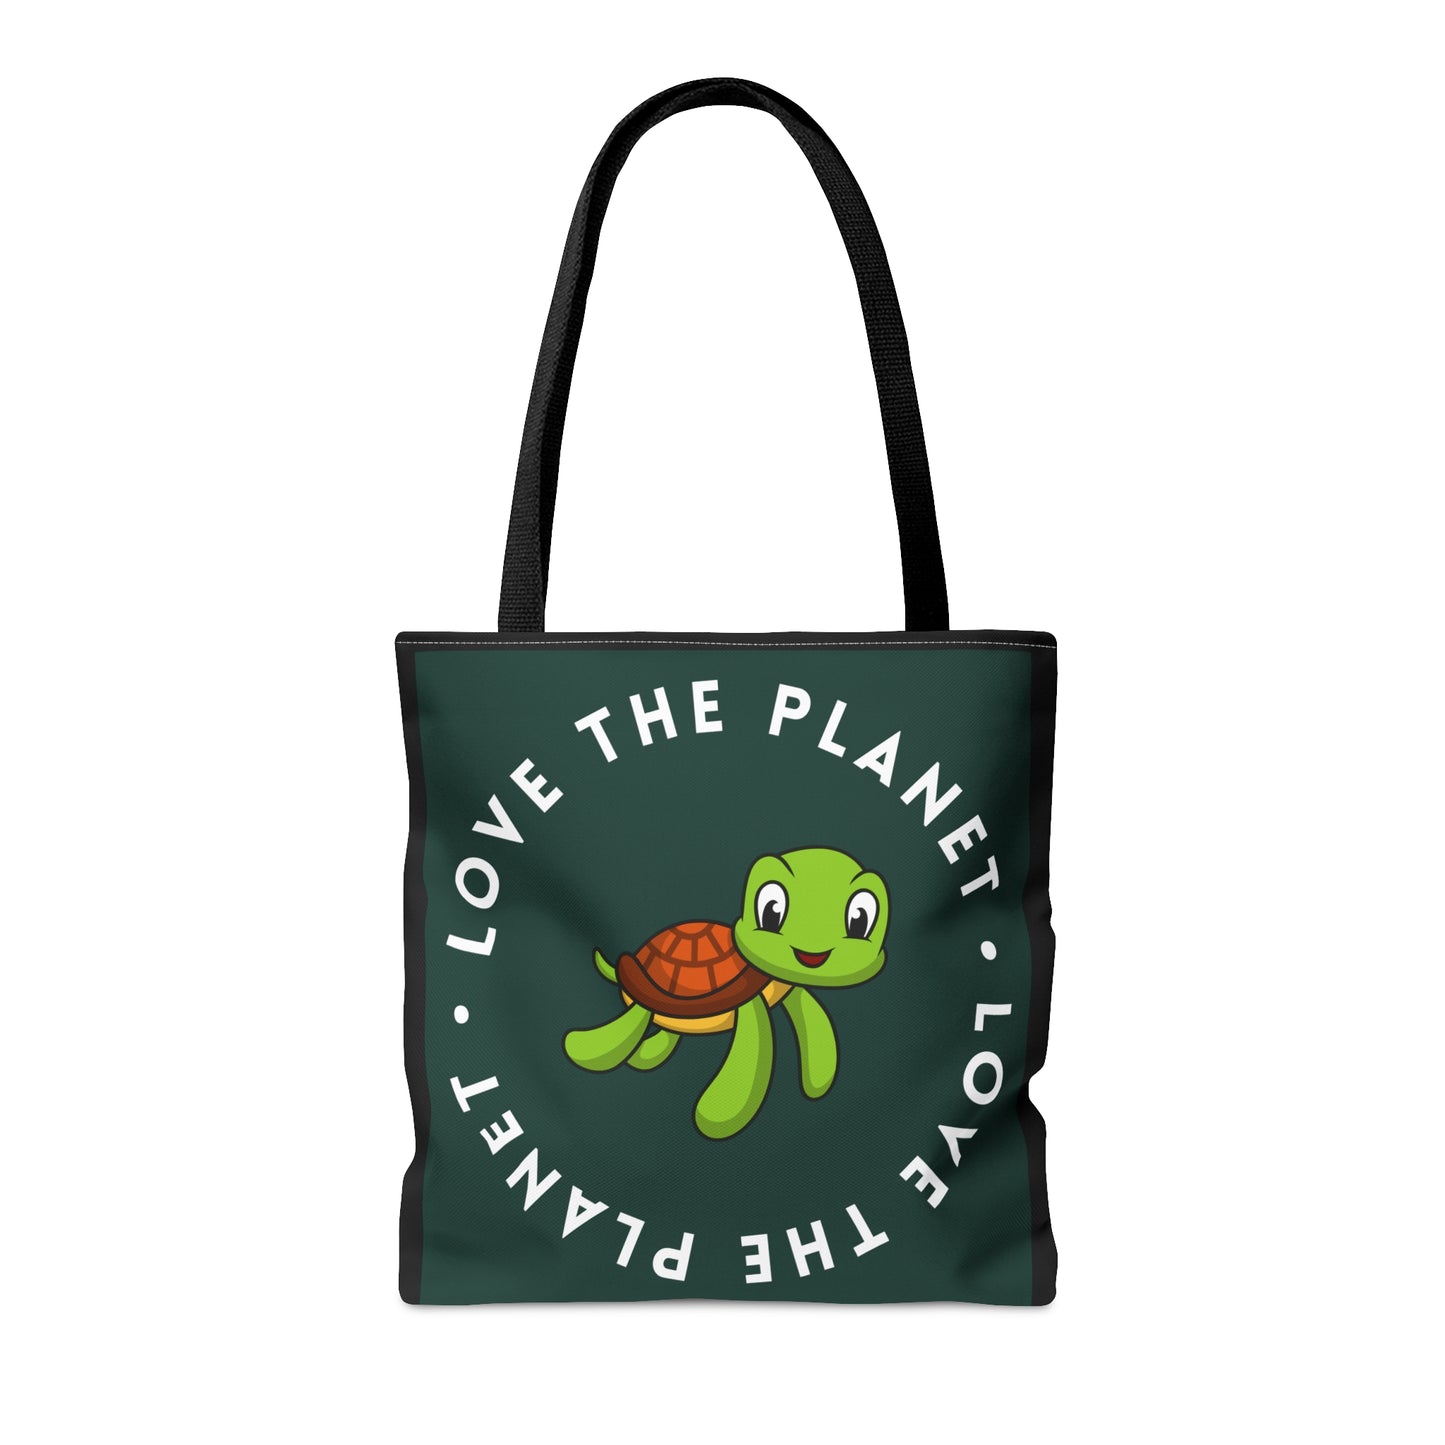 Adorable tortoise inside a  “LOVE THE PLANET” Tote Bag in 3 sizes to meet your needs.